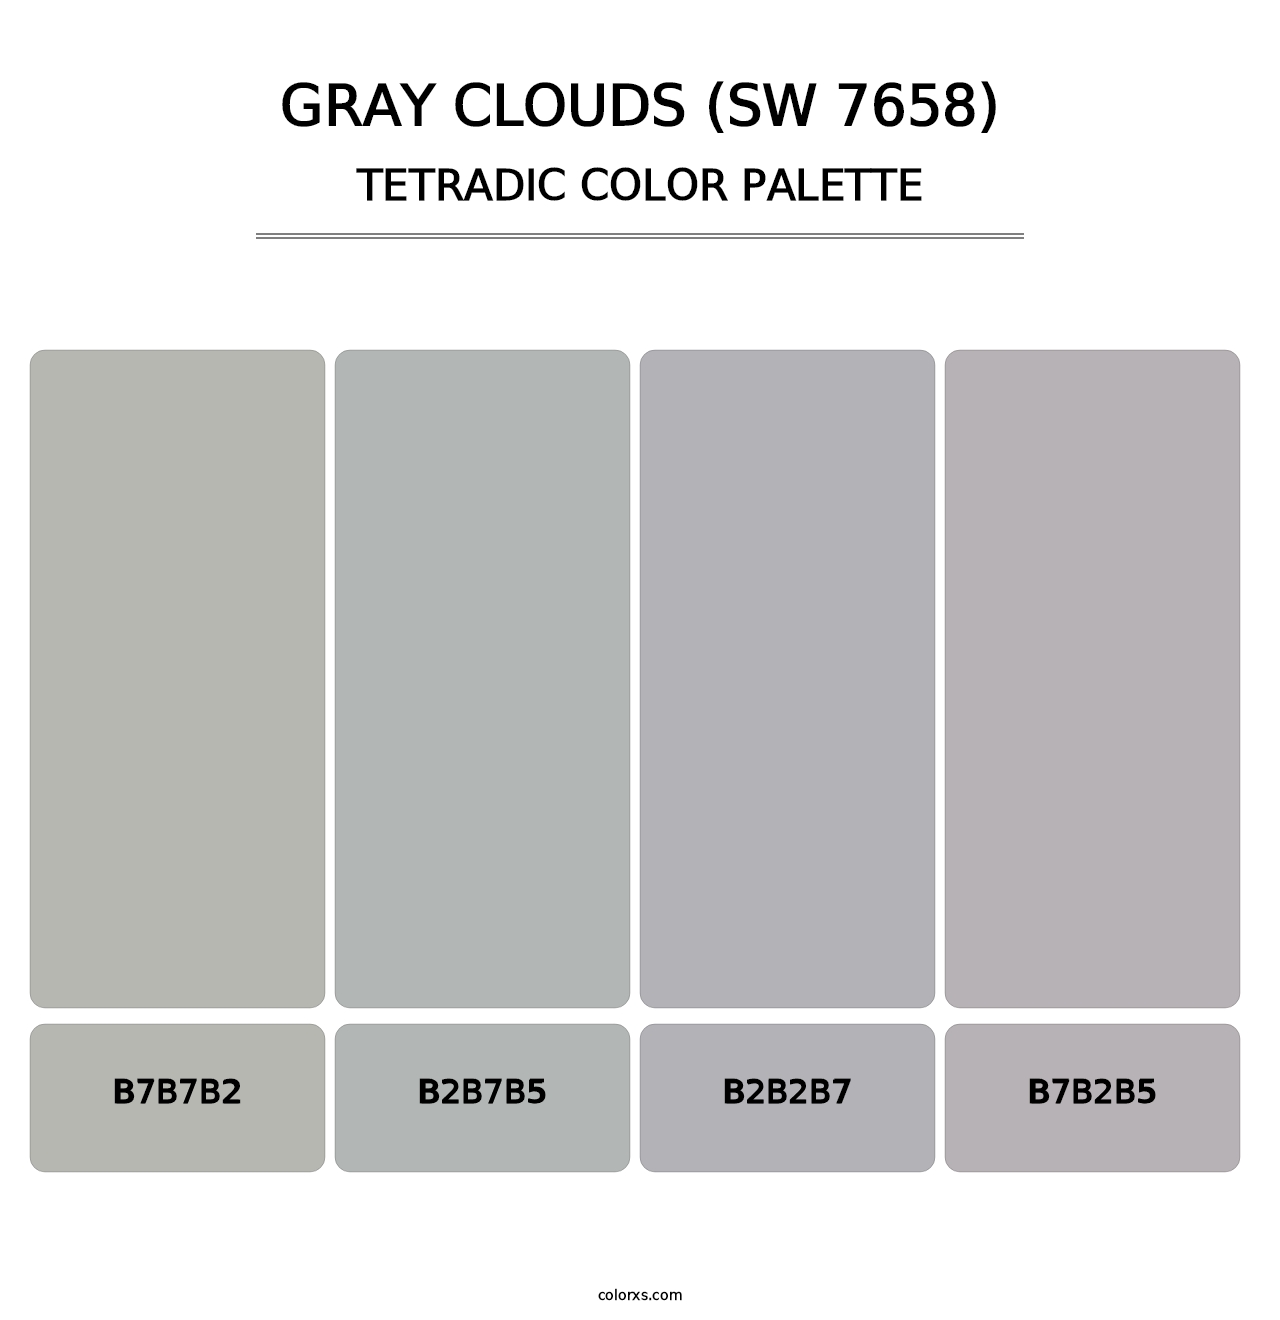 Gray Clouds (SW 7658) - Tetradic Color Palette